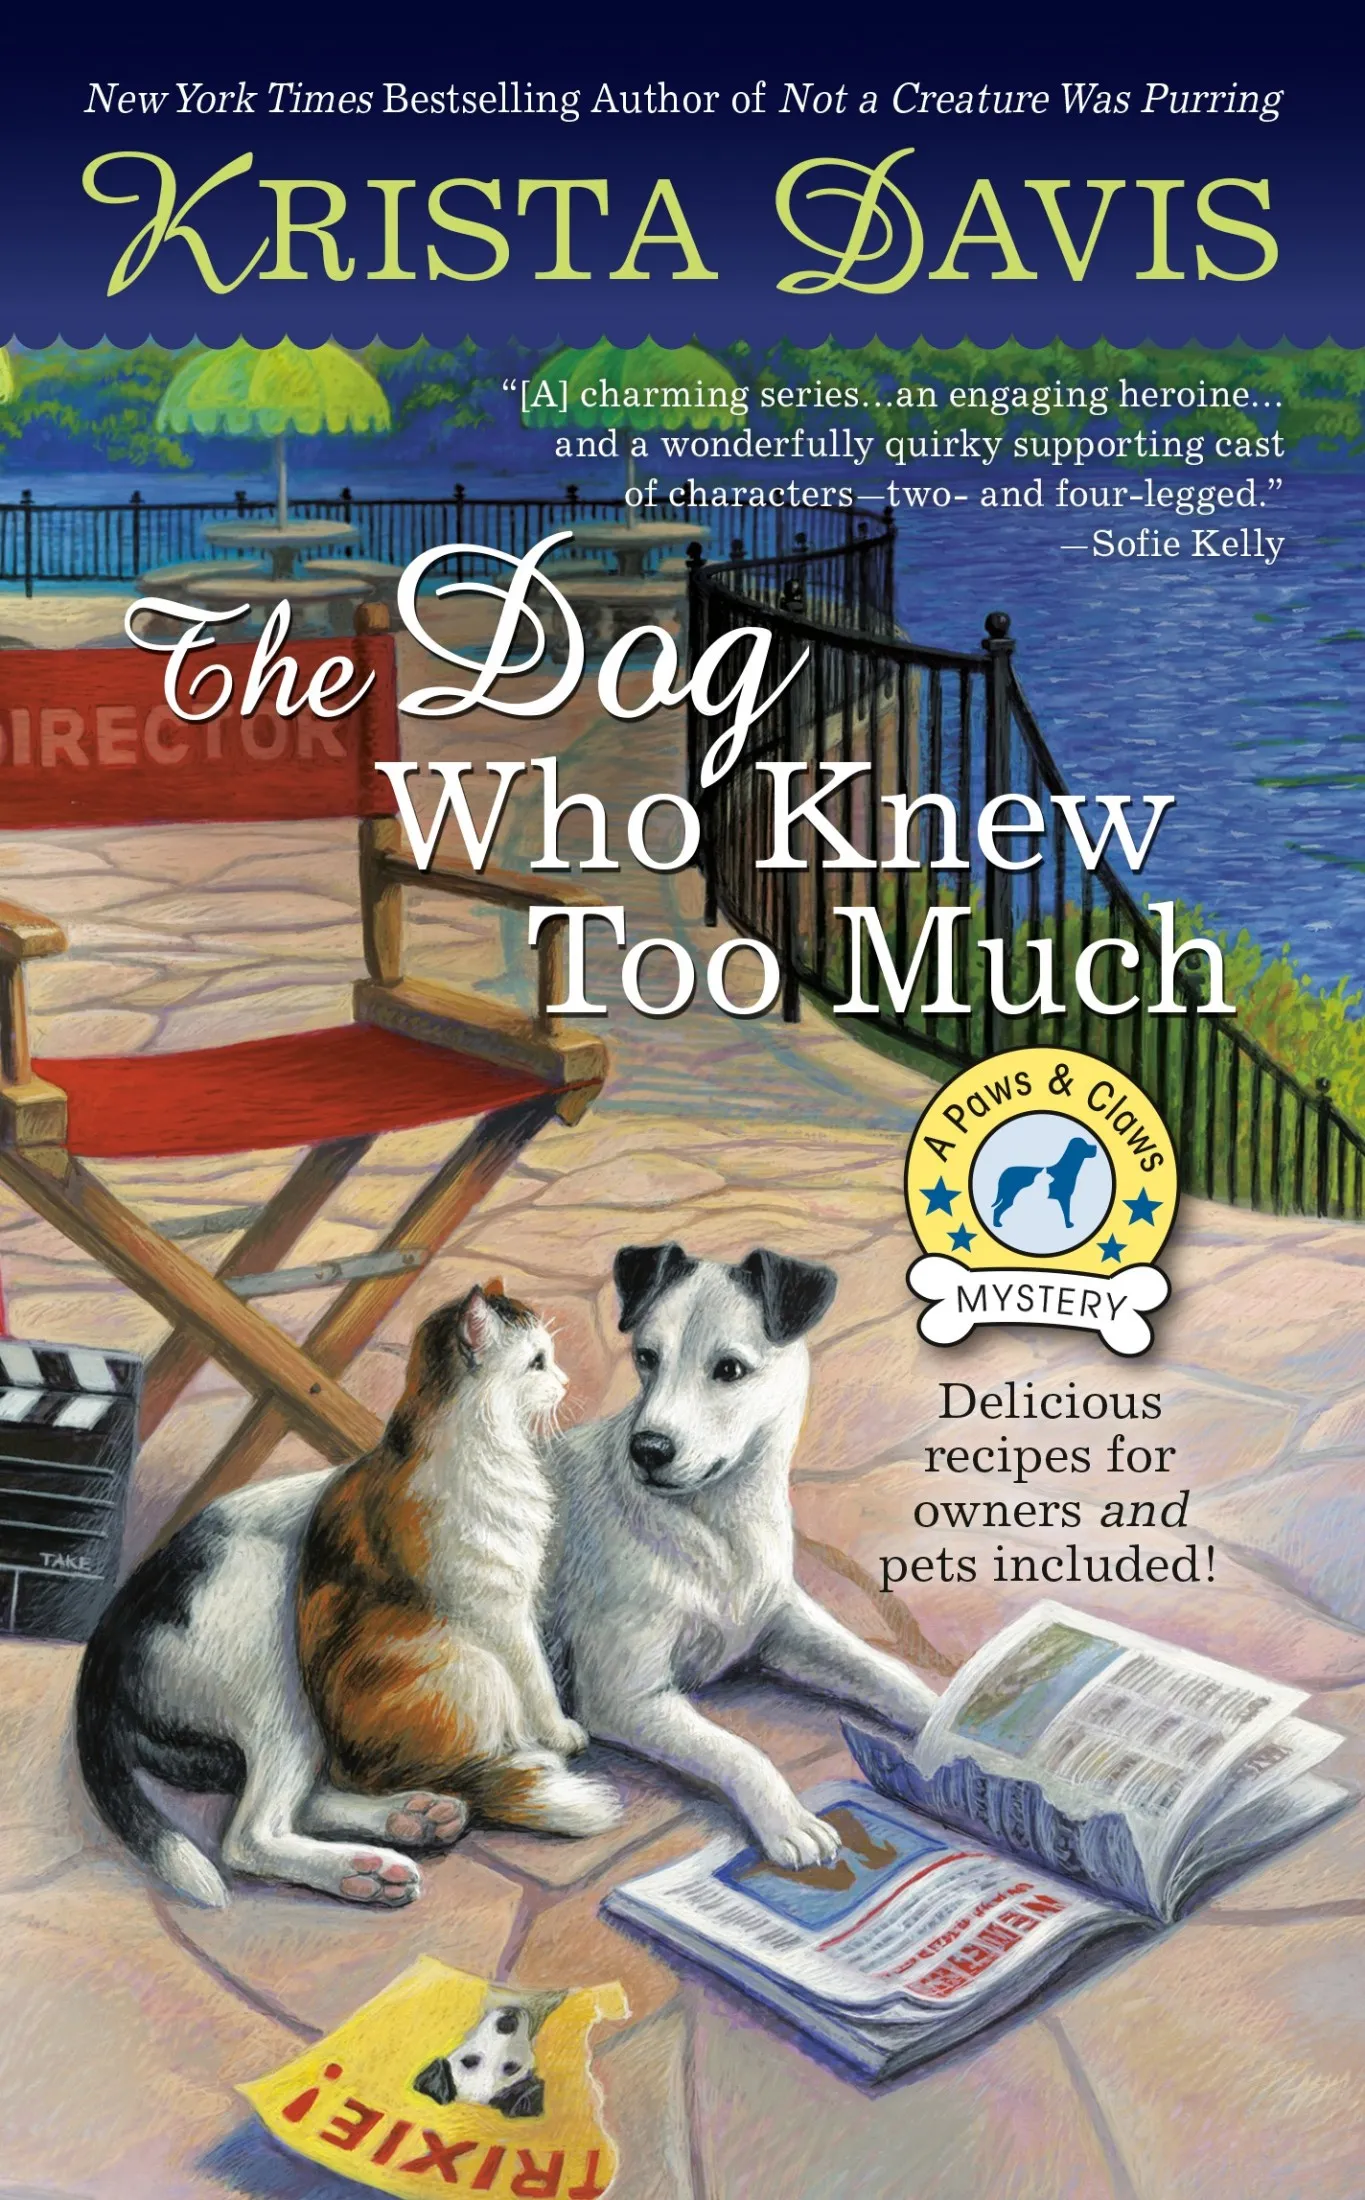 The Dog Who Knew Too Much (A Paws & Claws Mystery #6)